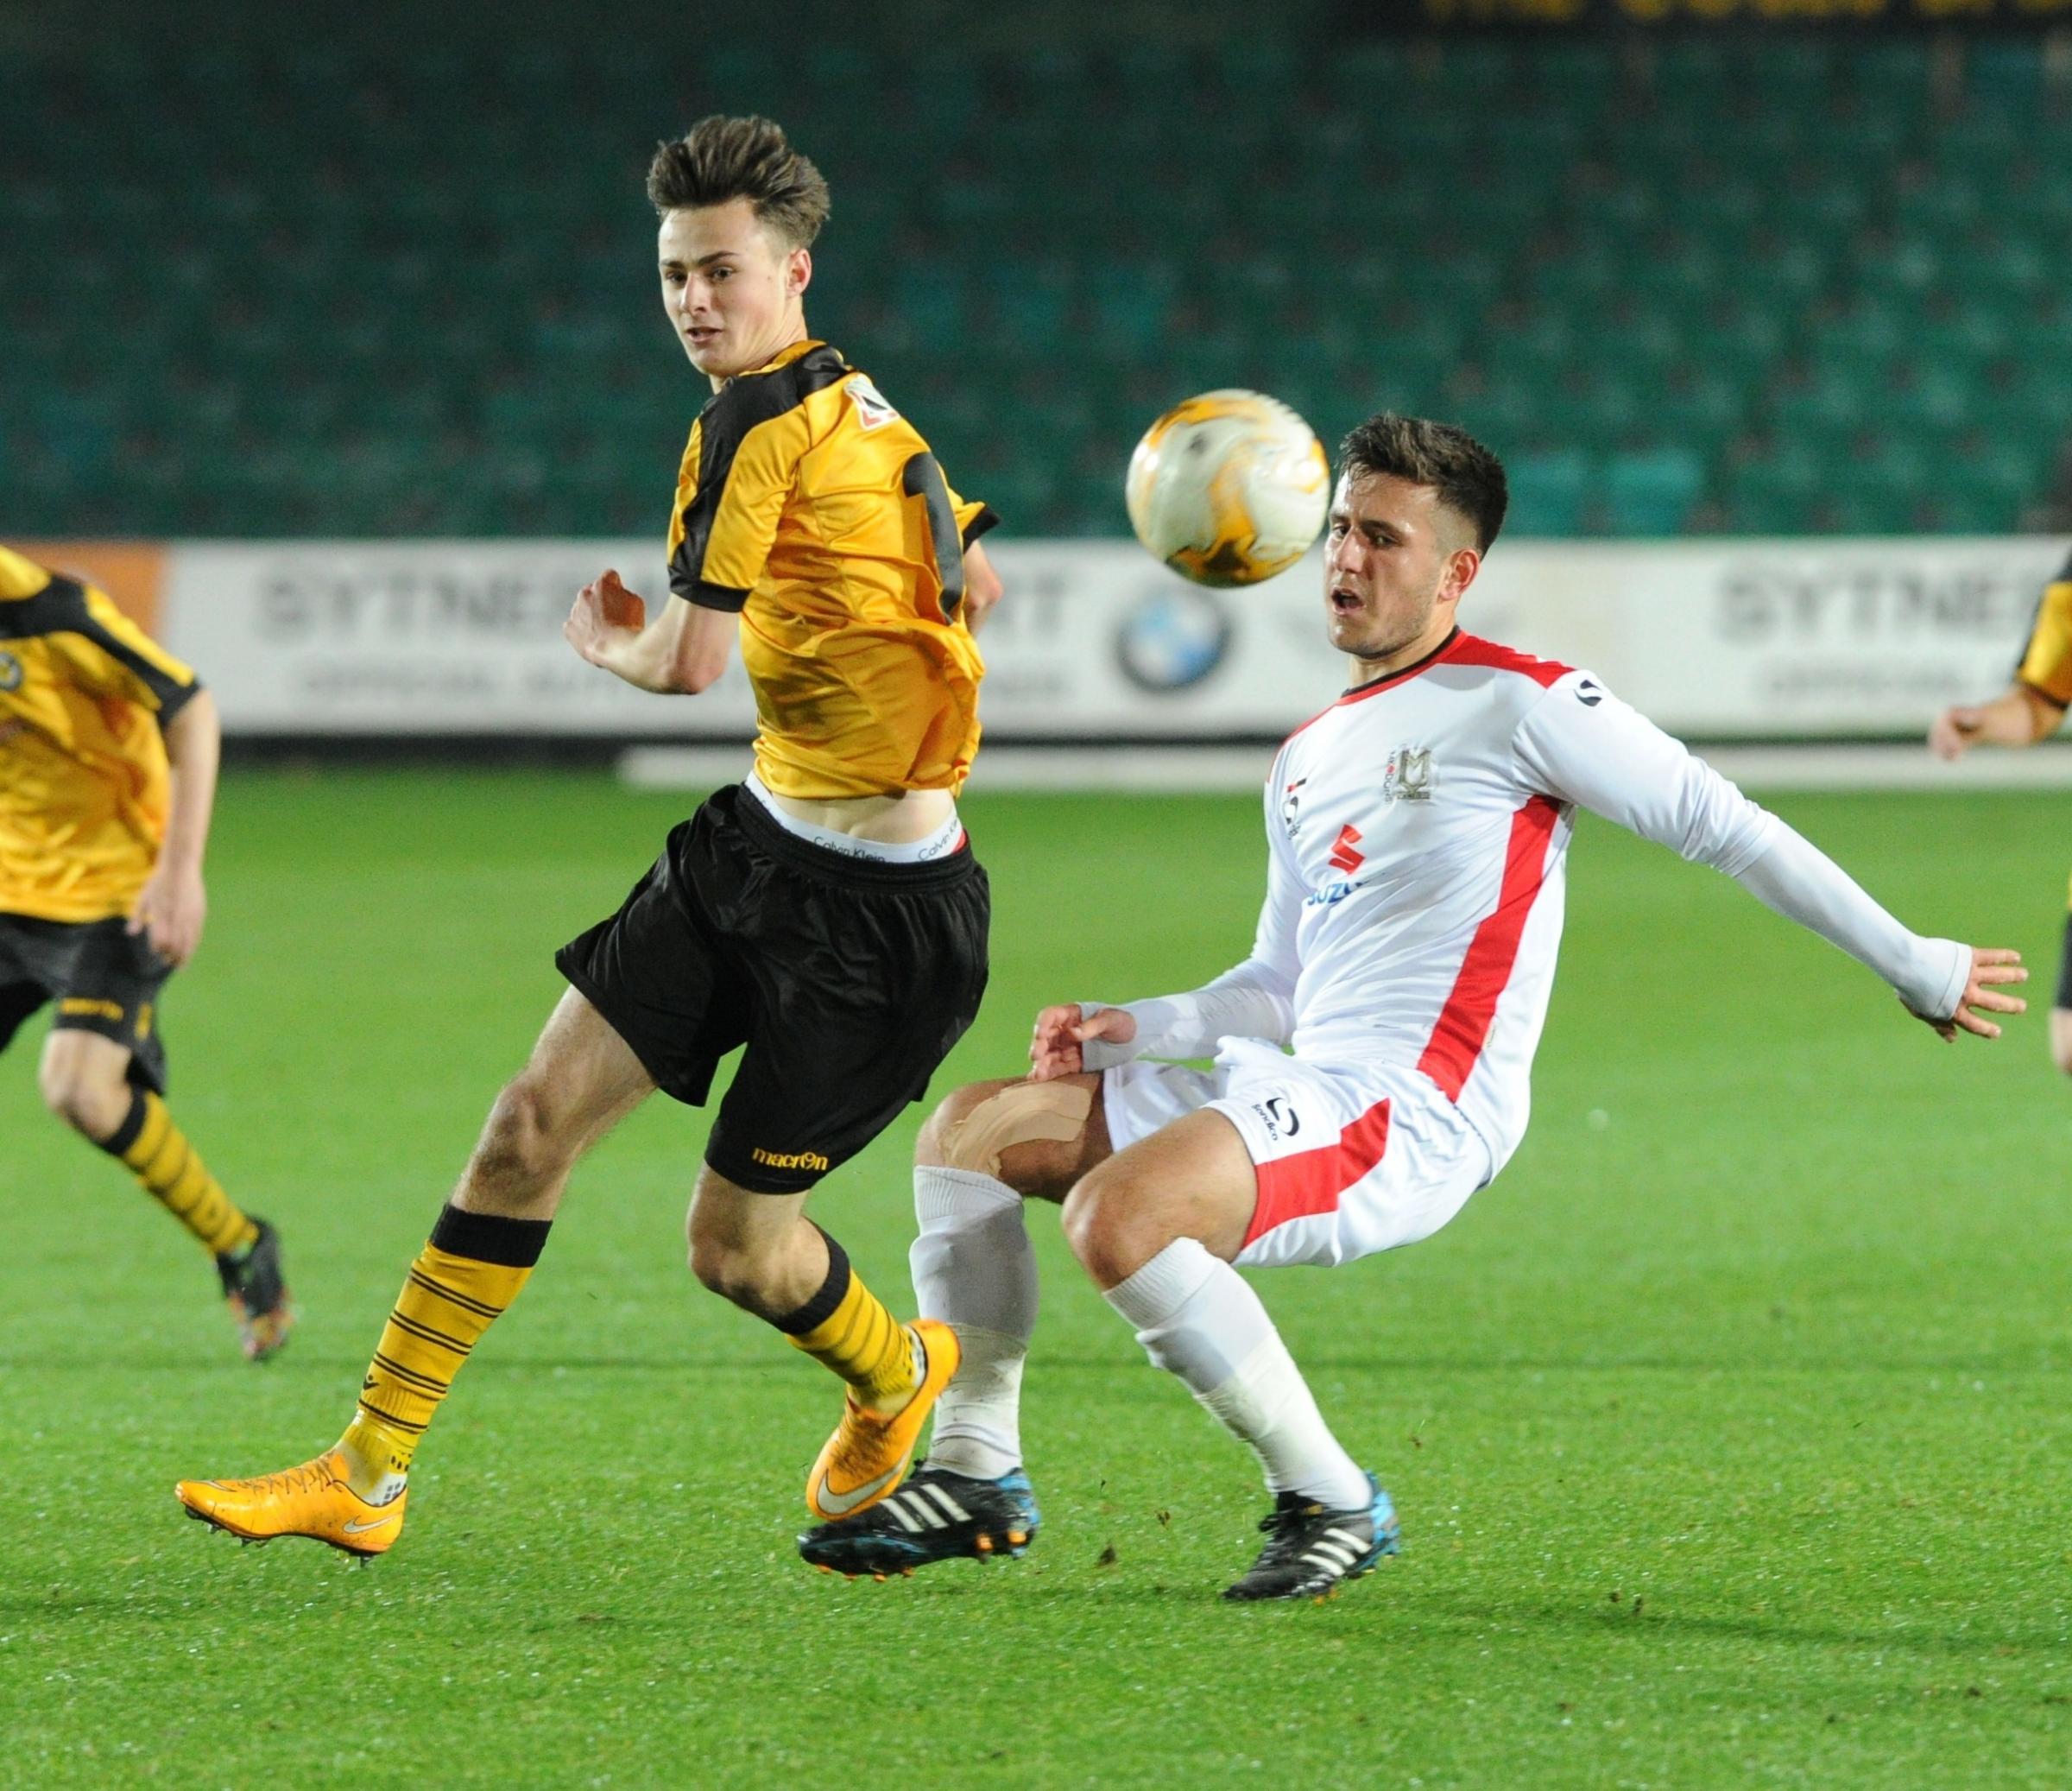 Aaron Collins in action for County